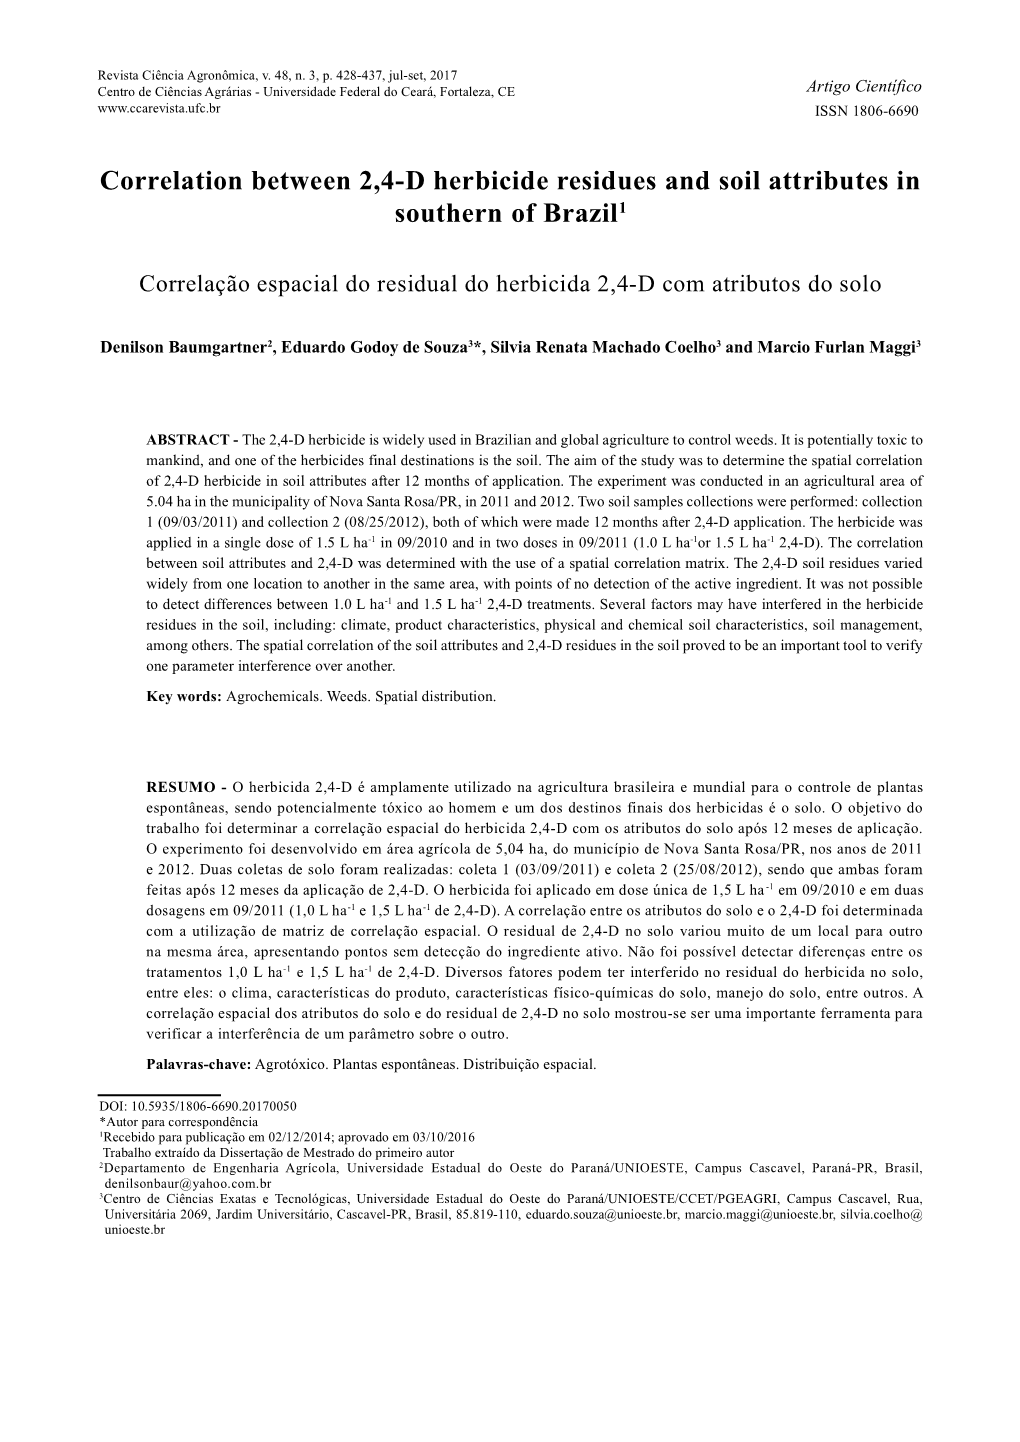 Correlation Between 2,4-D Herbicide Residues and Soil Attributes in Southern of Brazil1